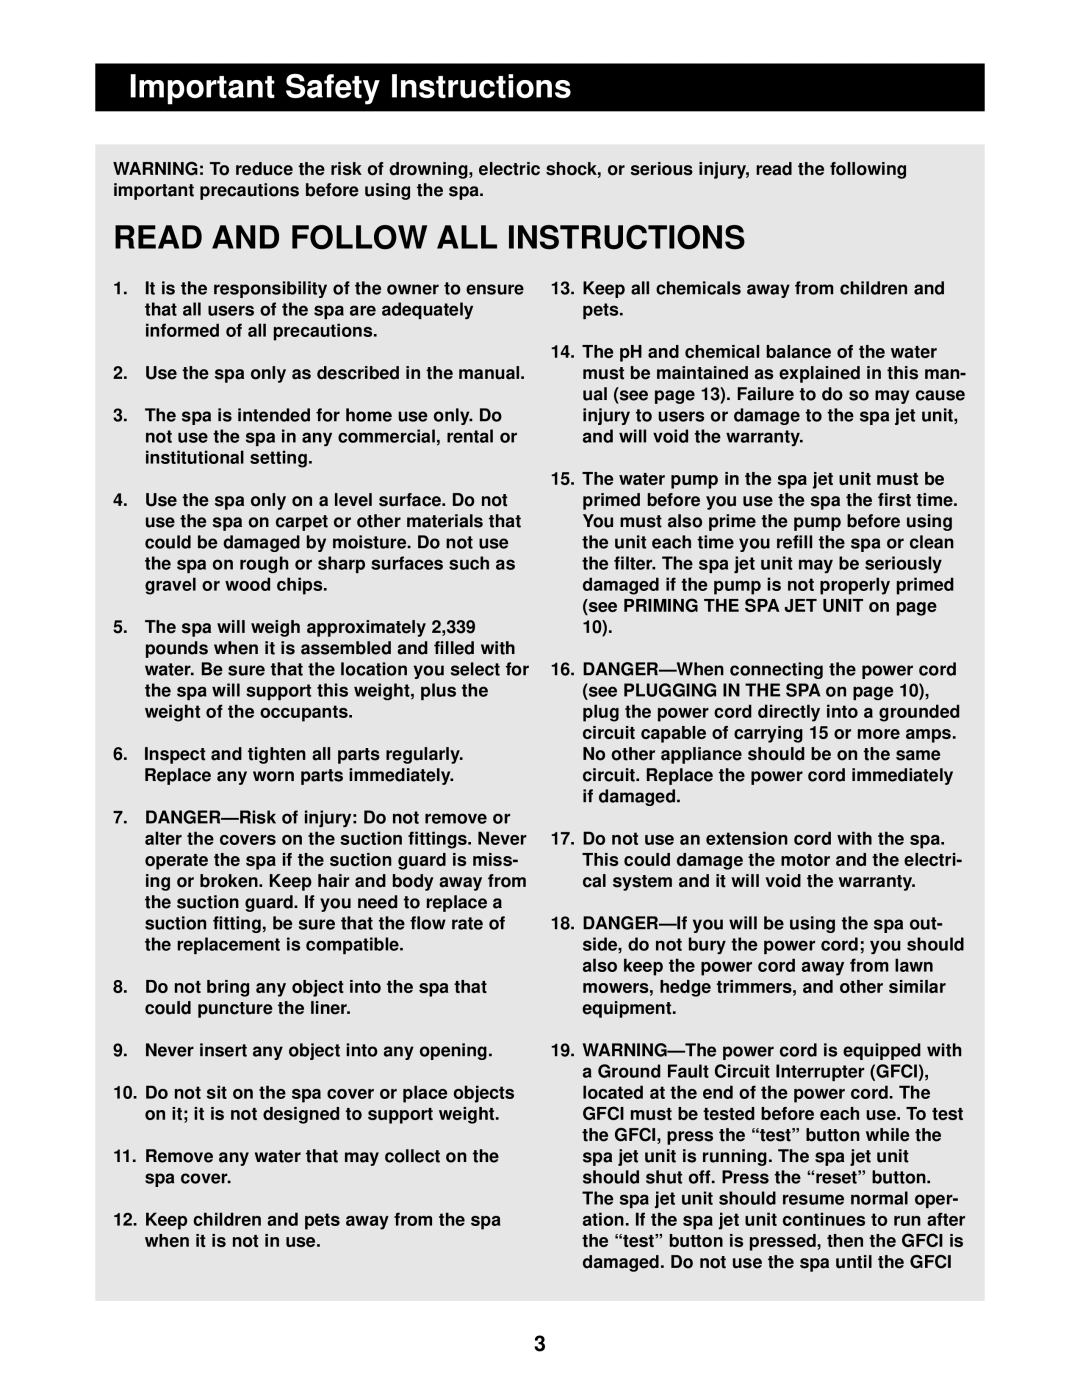 Image 831.10815 Important Safety Instructions, Read And Follow All Instructions, The spa is intended for home use only. Do 